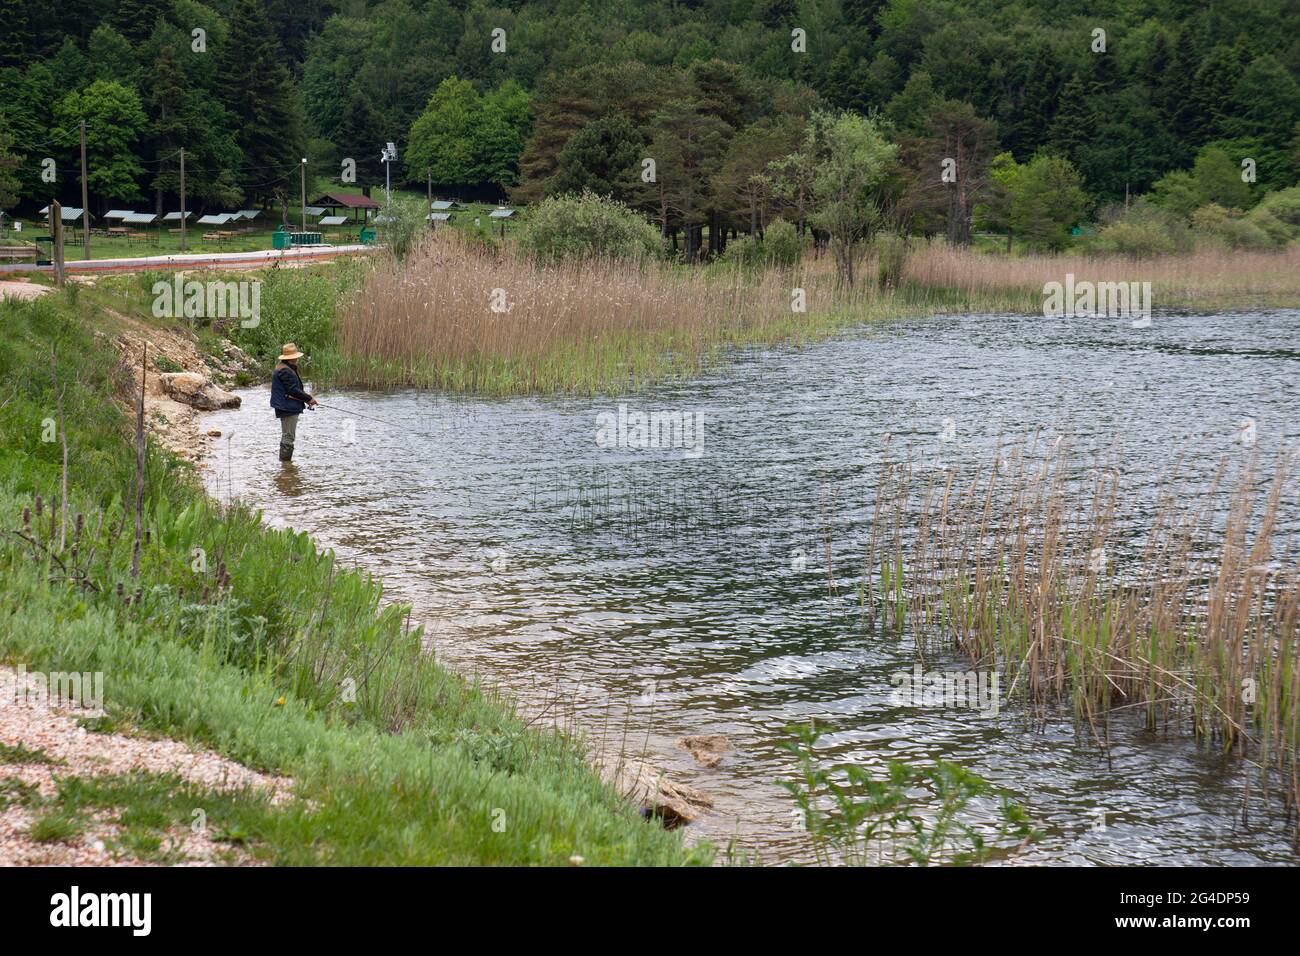 A man is fishing alone by the lake, among the reeds, with a fishing rod. Bolu Abant national park. Stock Photo